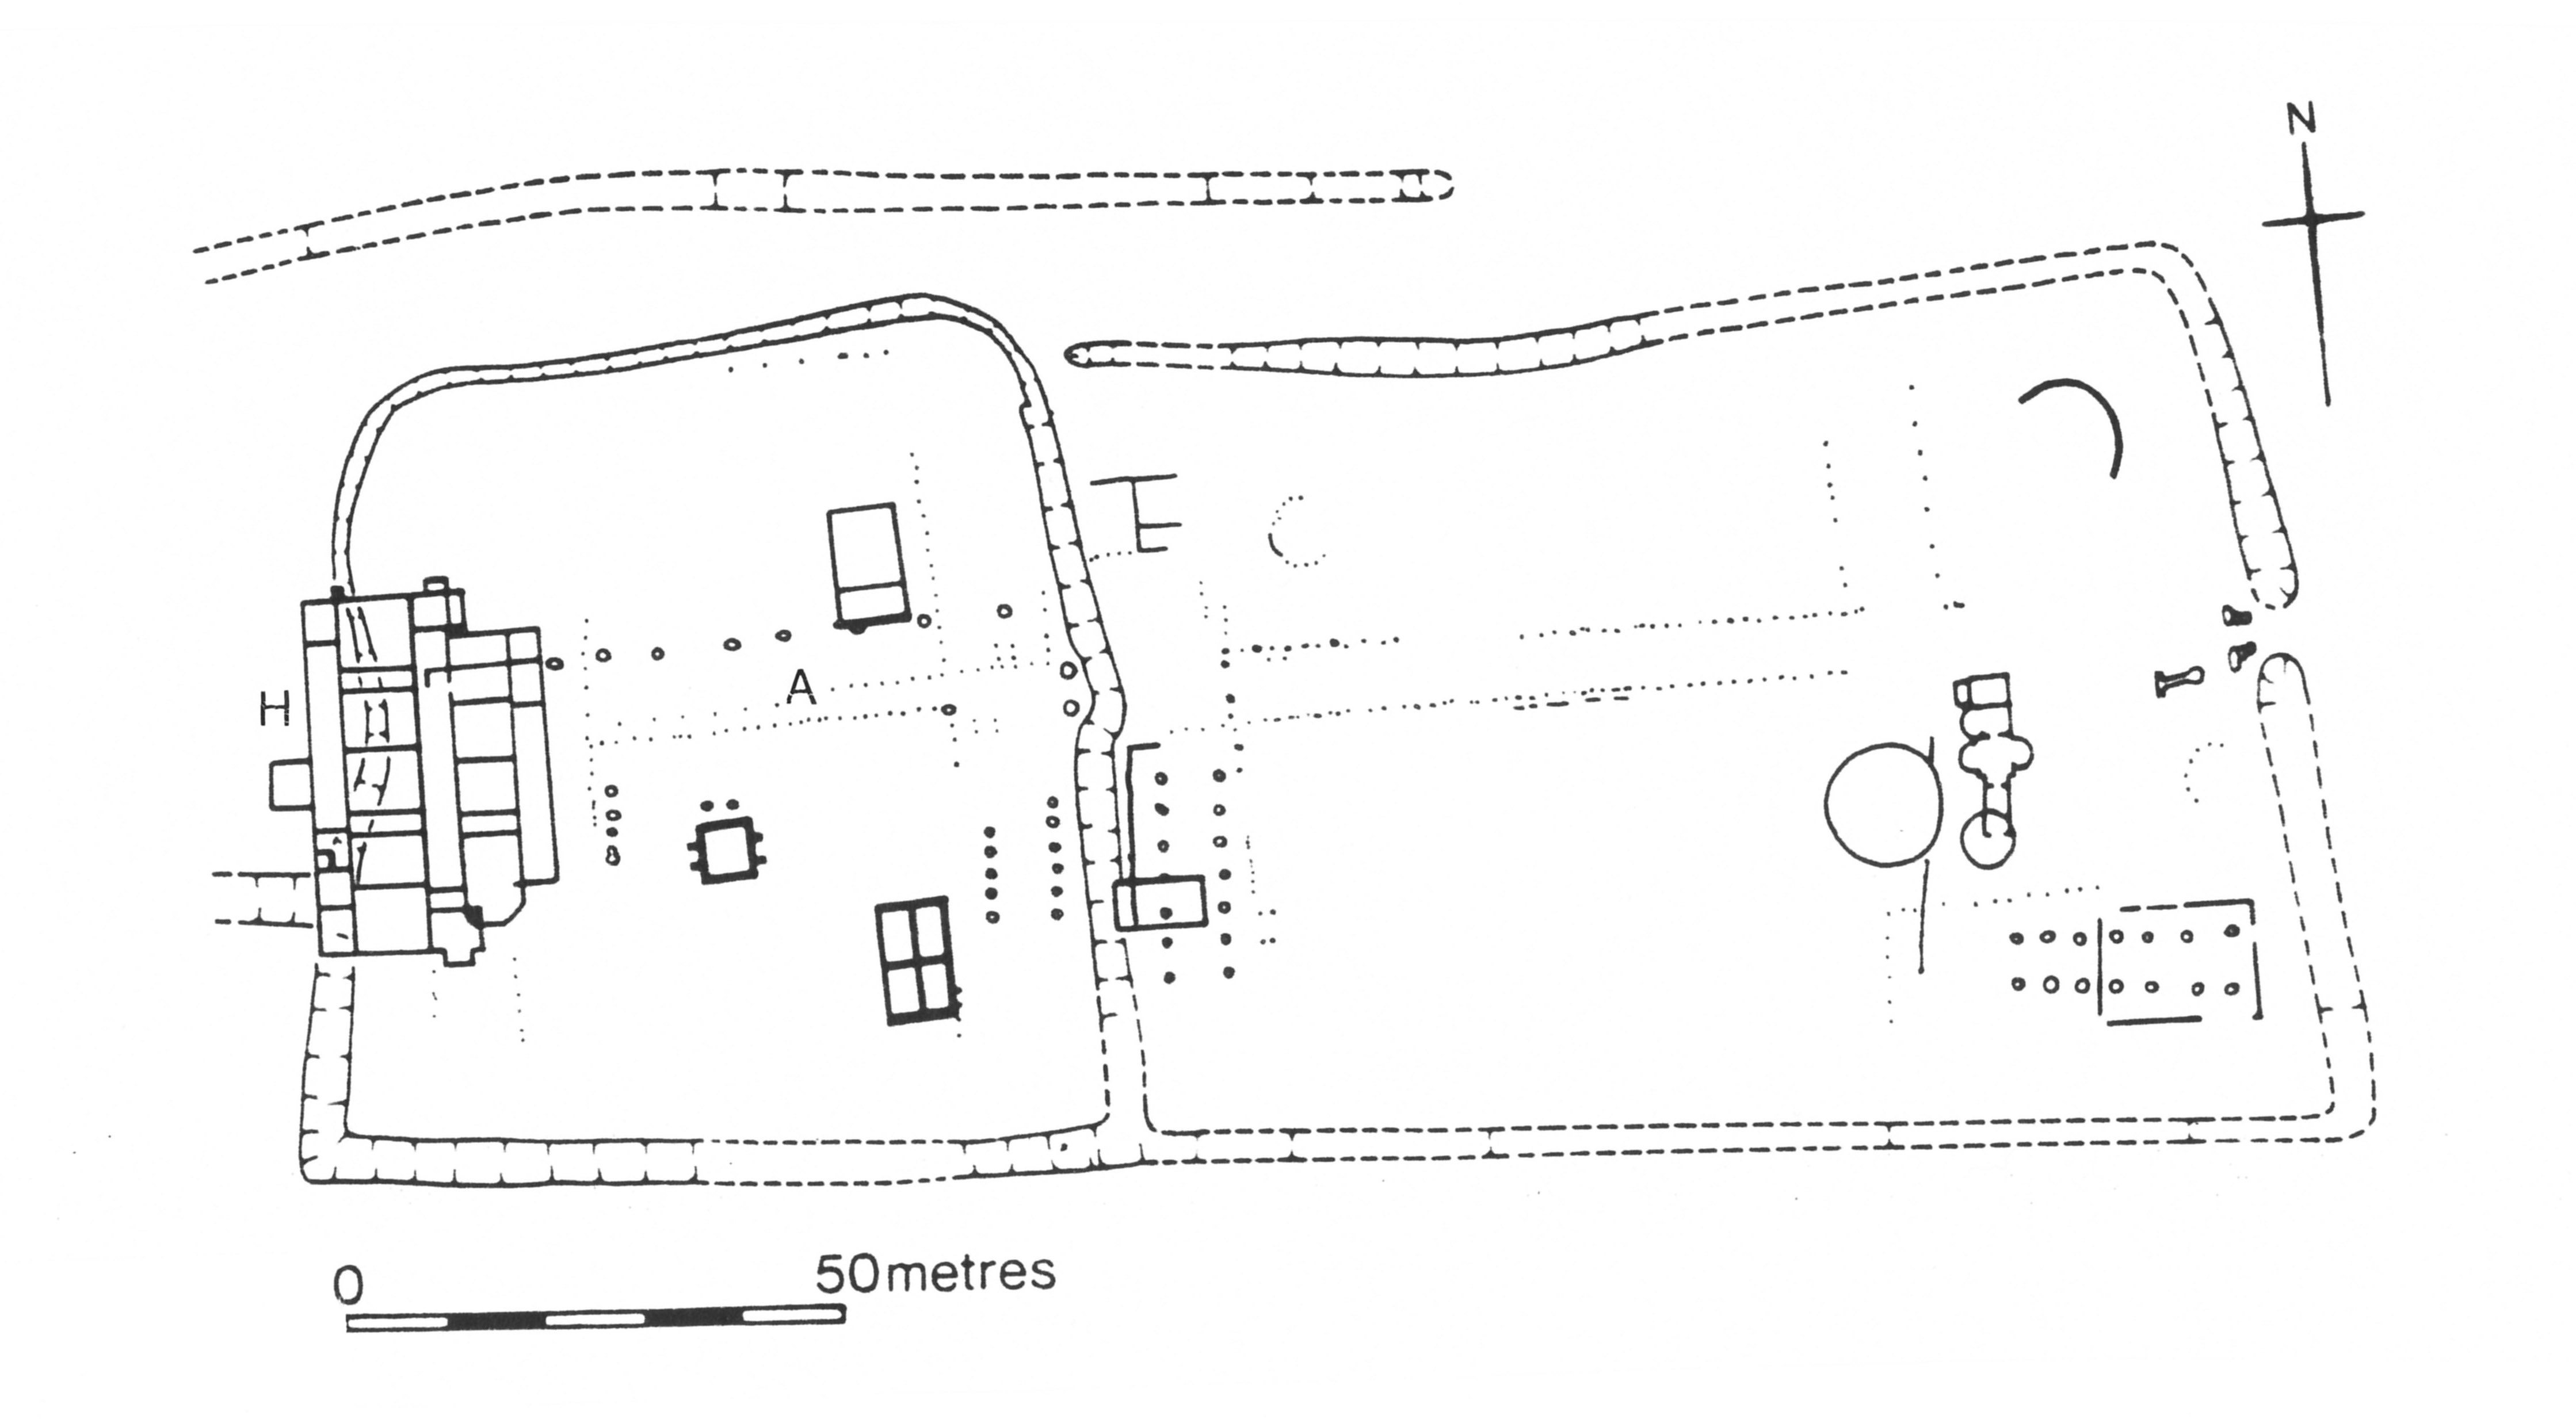 Fig. 1: Plan of the farm with two ditched enclosures surrounding the house (H) and an avenue of trees or an arbor (A) leading to it. Adapted from Neal, Wardle, and Hunn.